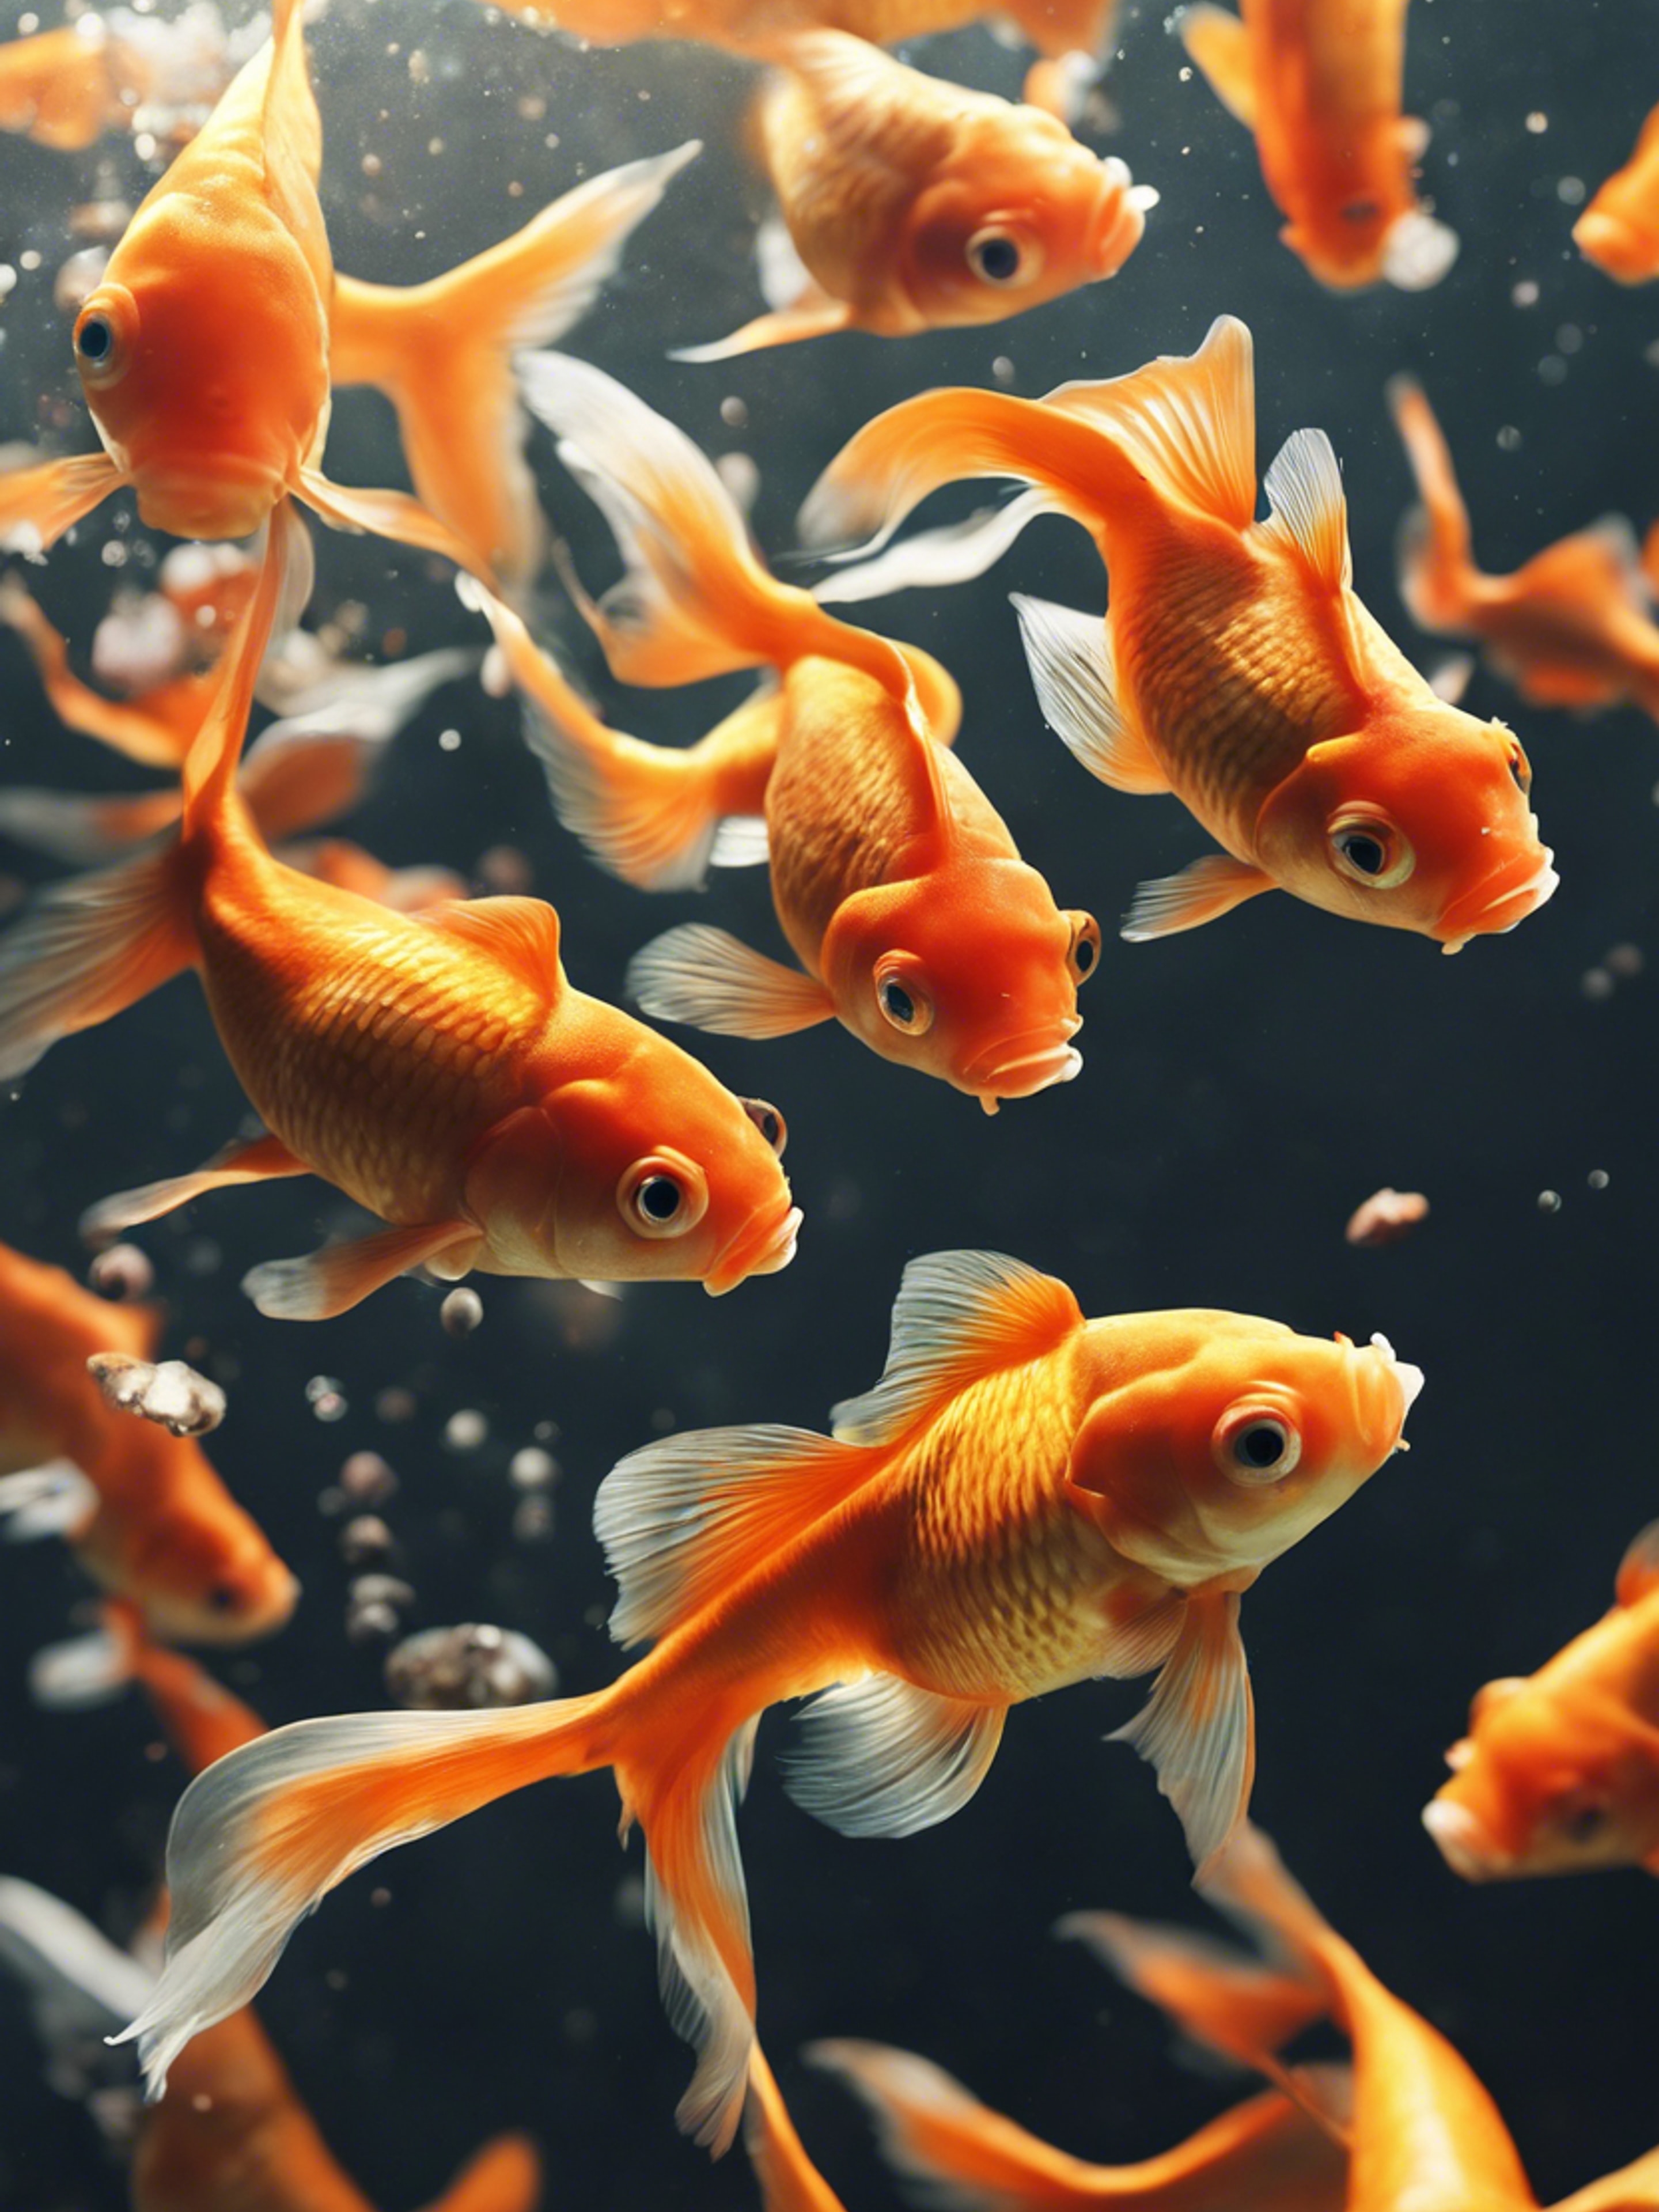 A group of goldfish gathered together feeding on floating fish food in a pond. 벽지[884d4a7ab78e48ae91a0]